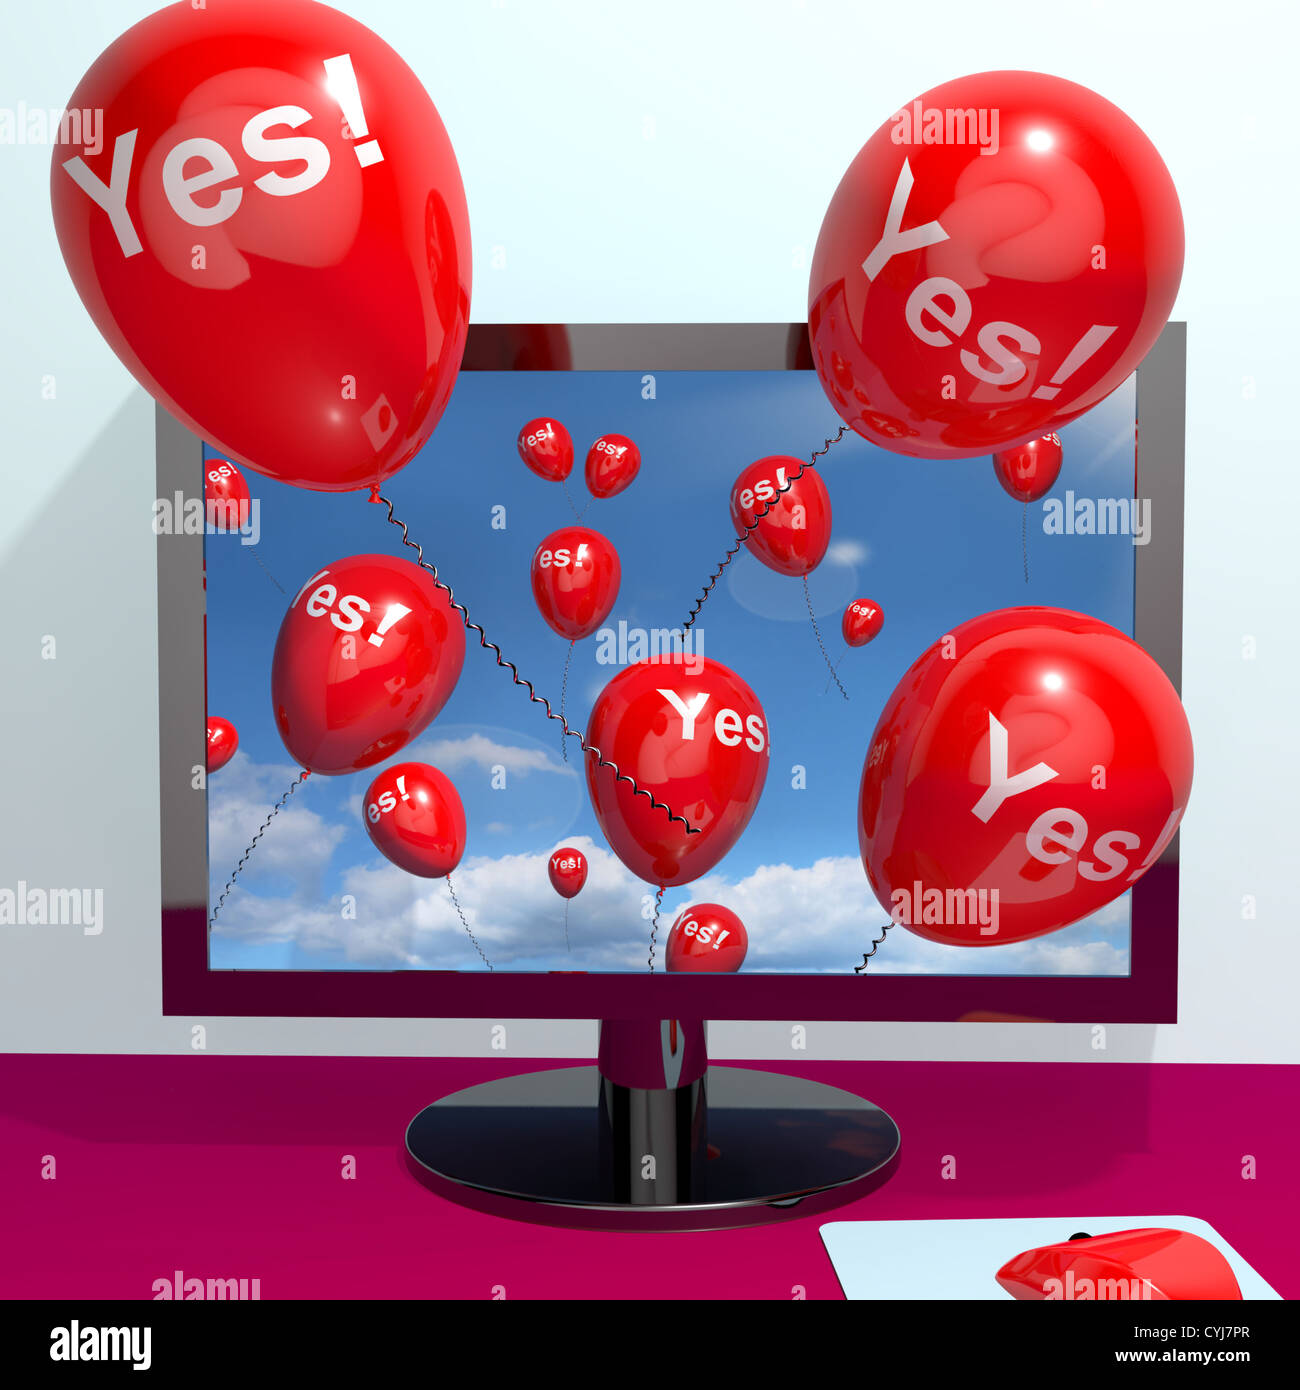 Yes Balloons From A Computer Shows Approval And Support Message Online Stock Photo